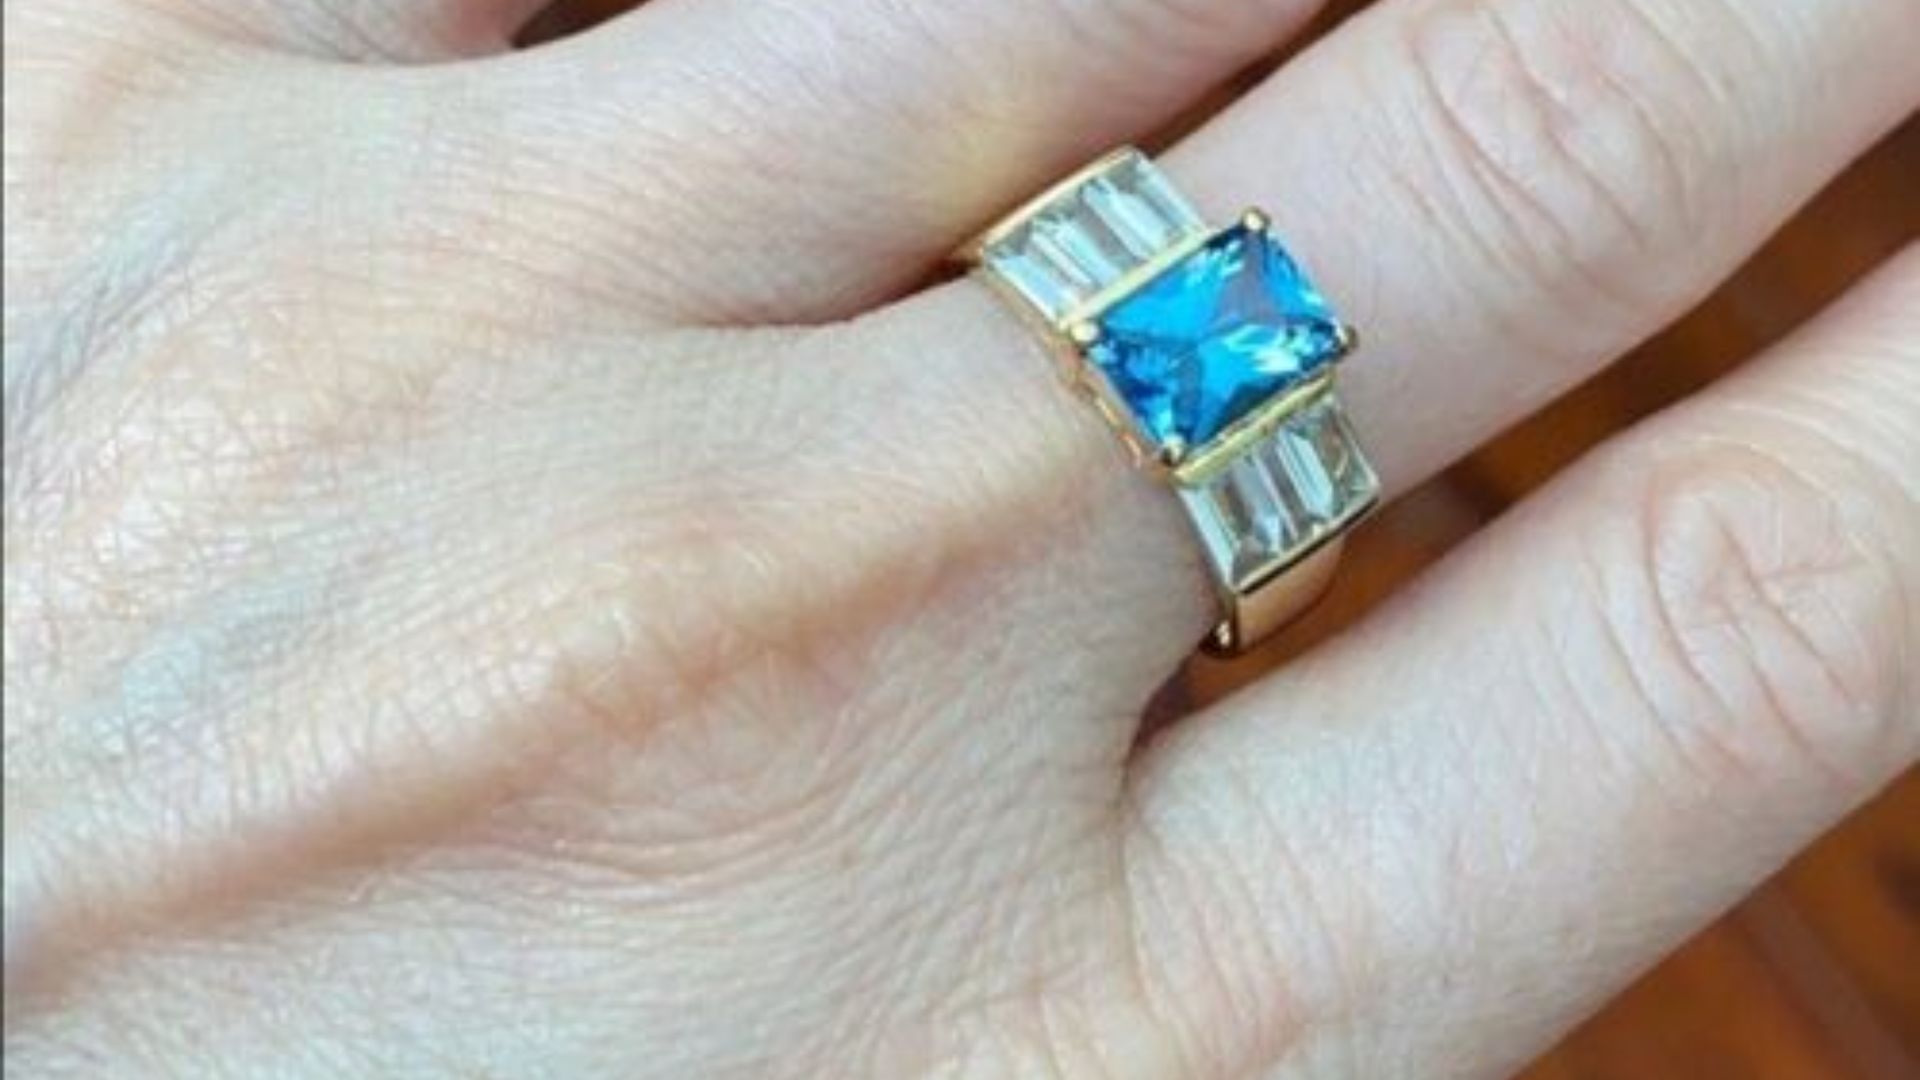 Person Wearing A Ring With Aquamarine Gemstone